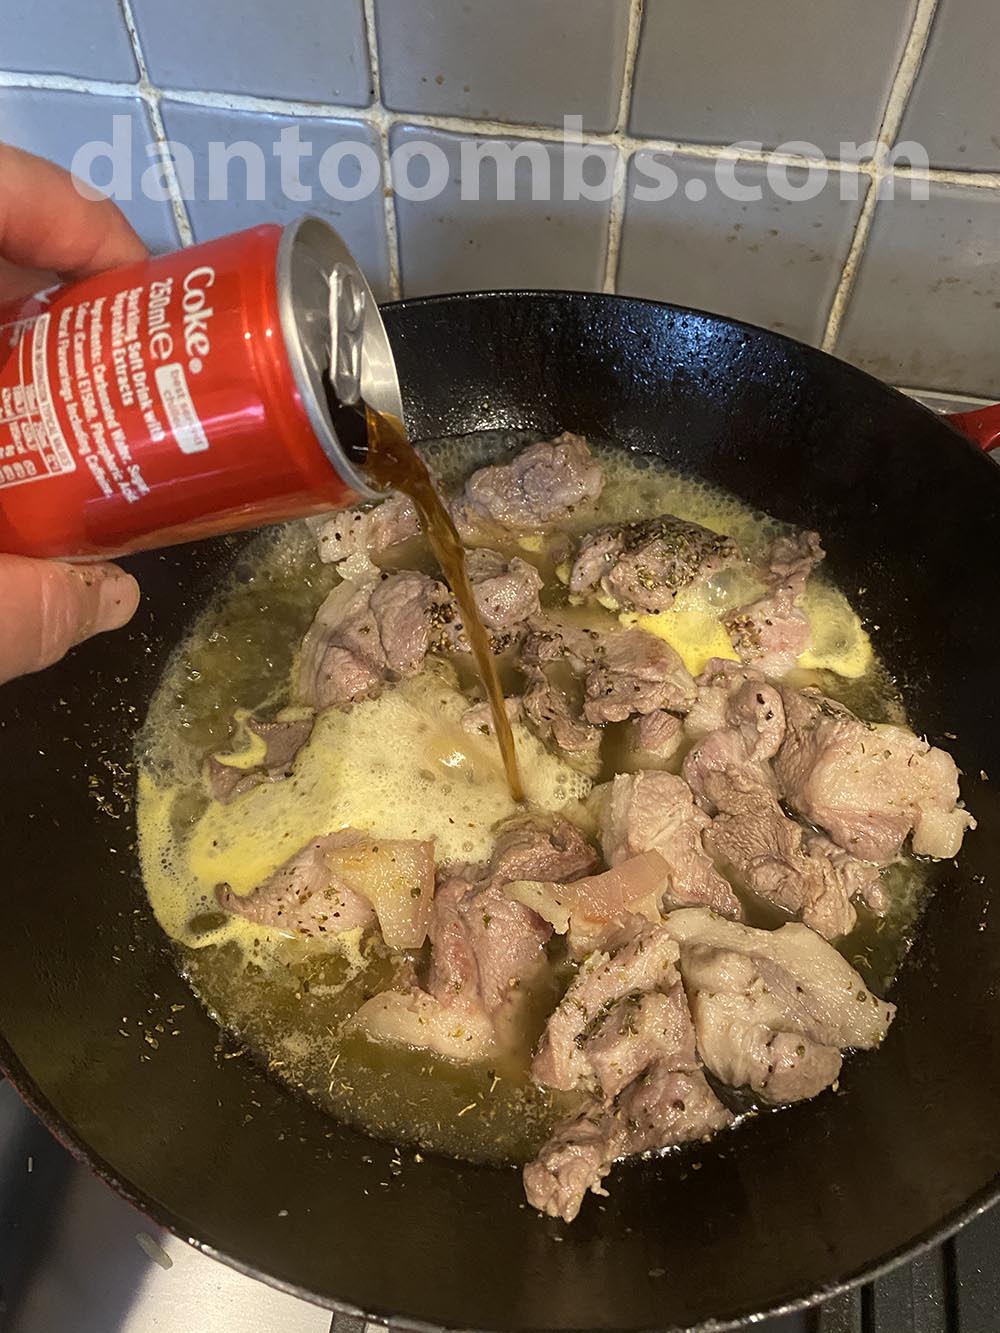 Adding coke to meat